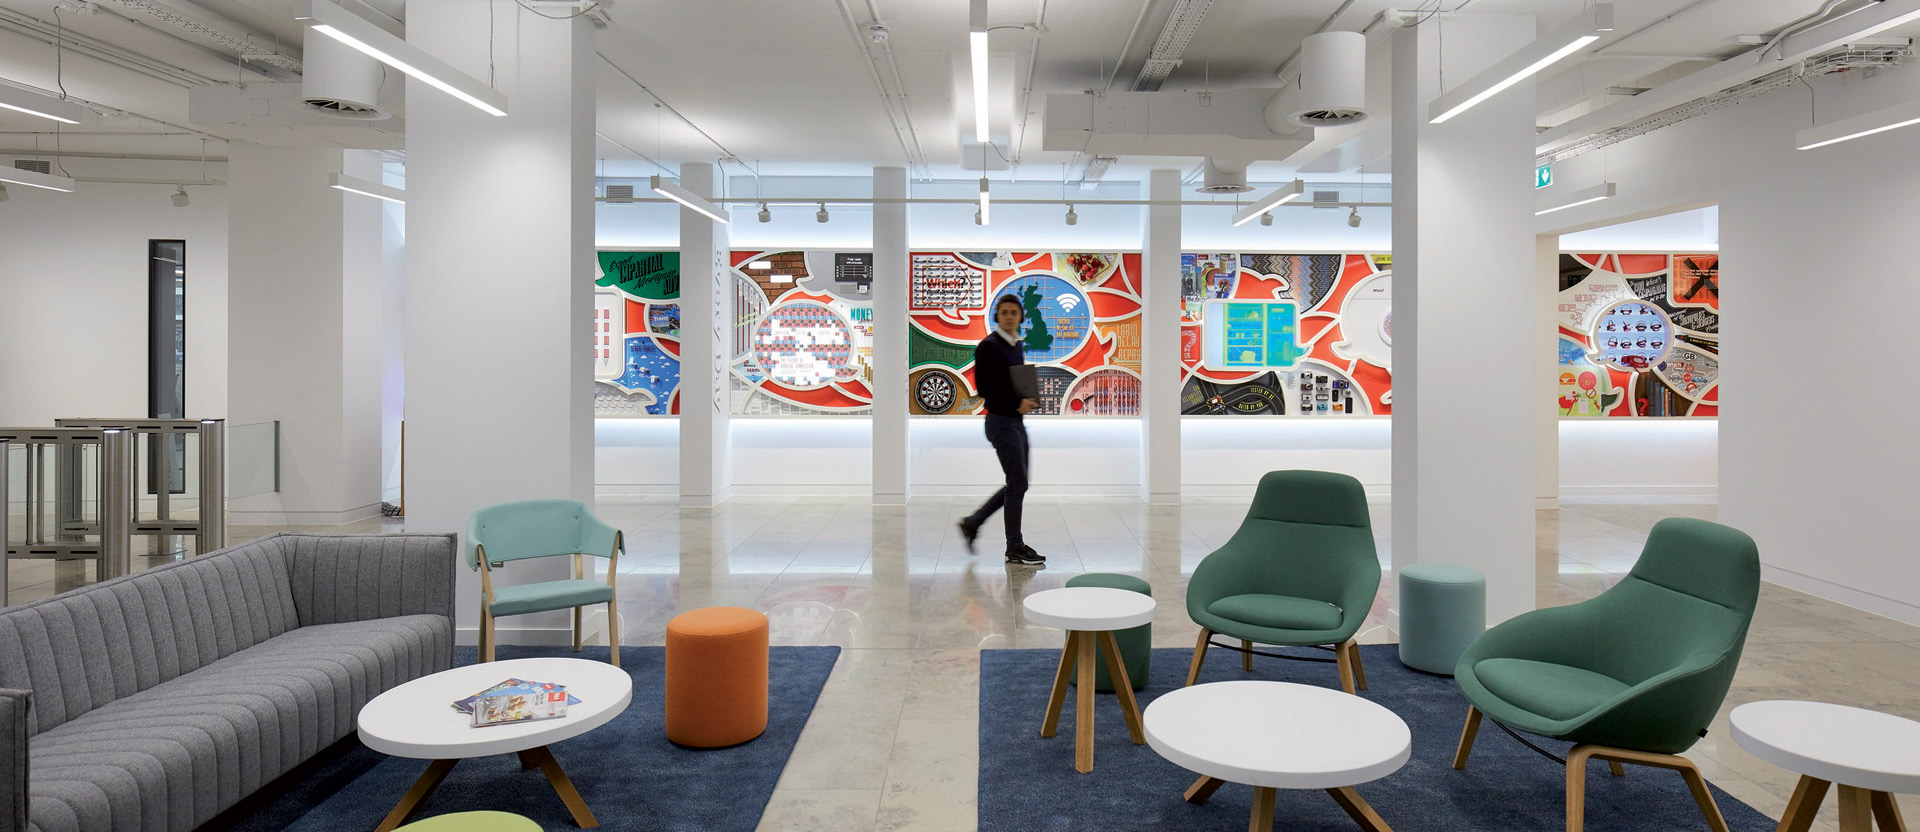 Bright, open-plan office lobby featuring a minimalist aesthetic with a variety of seating options, including teal armchairs, a grey sofa, and white round tables. Exposed ceiling with industrial lighting complements colorful, abstract wall art, creating a vibrant, welcoming space.